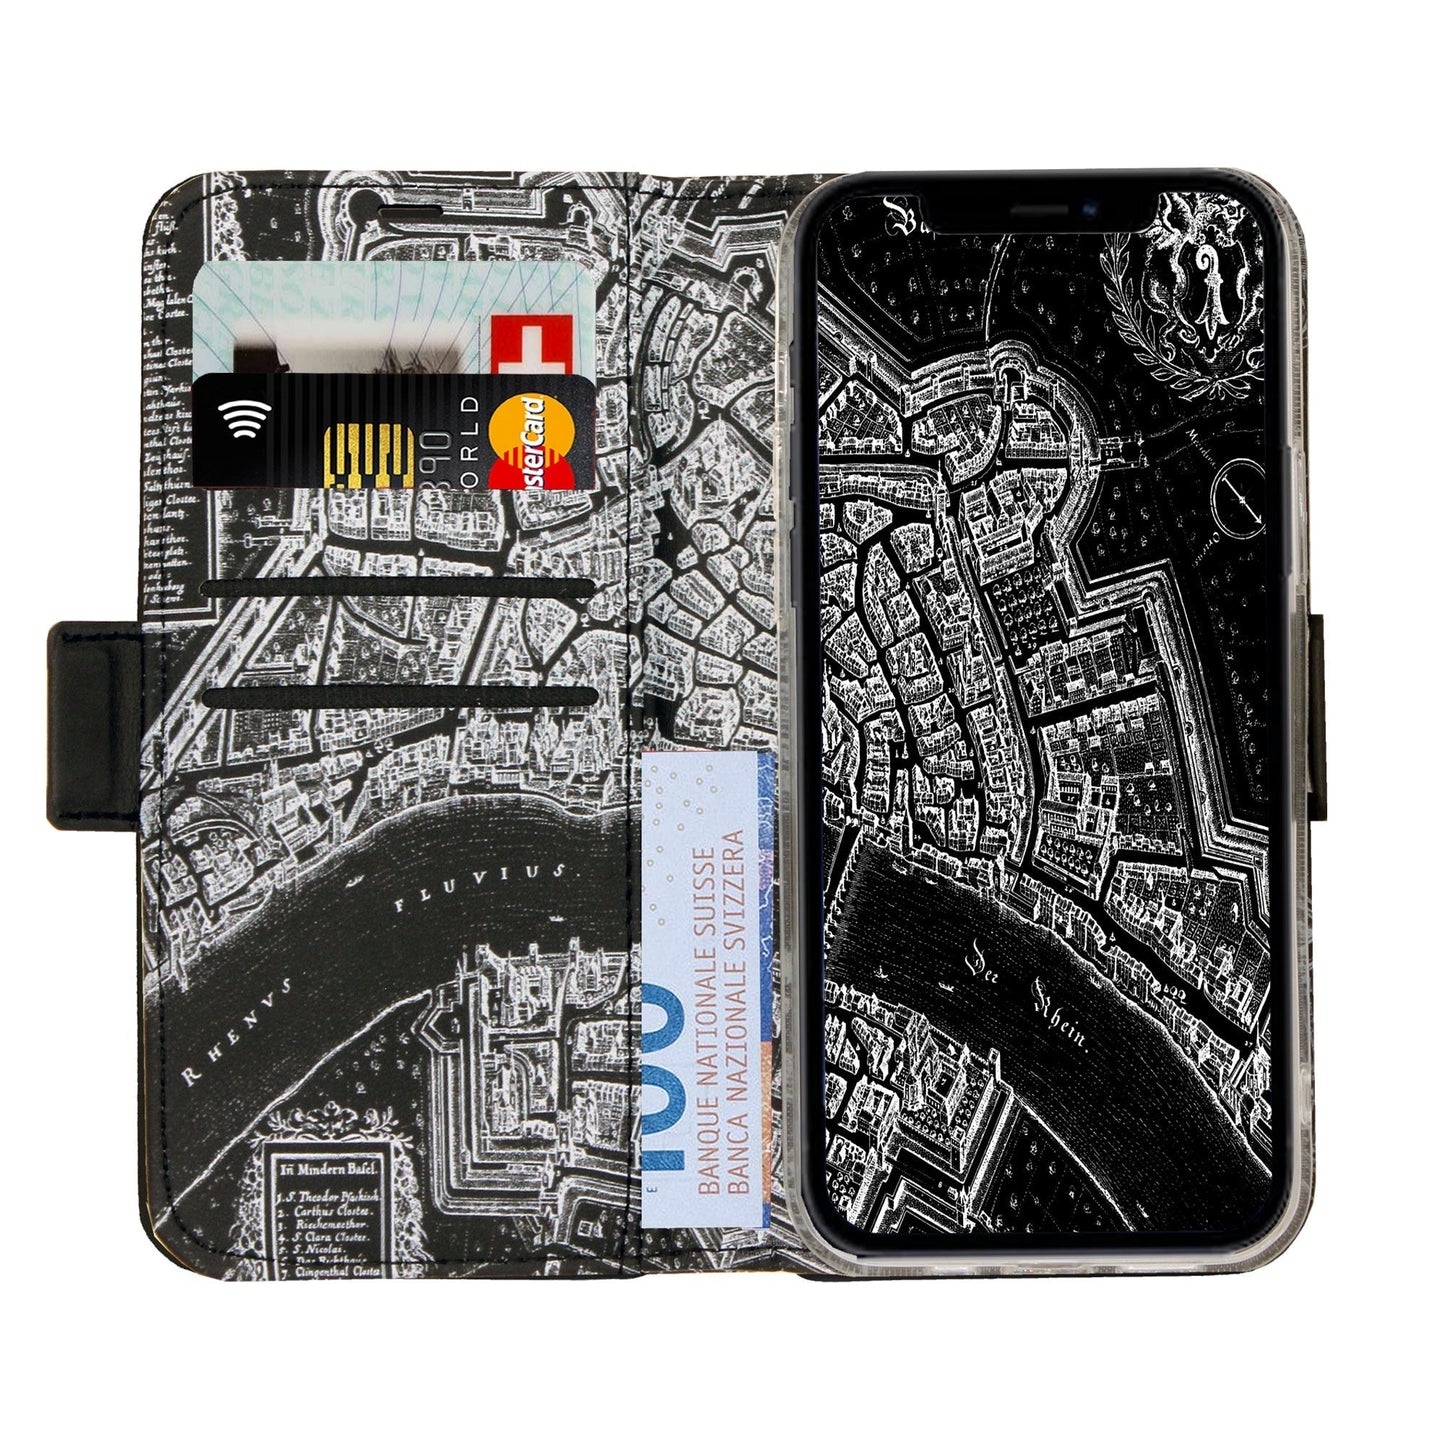 Basel Merian Negative Victor Case for iPhone 13 Pro